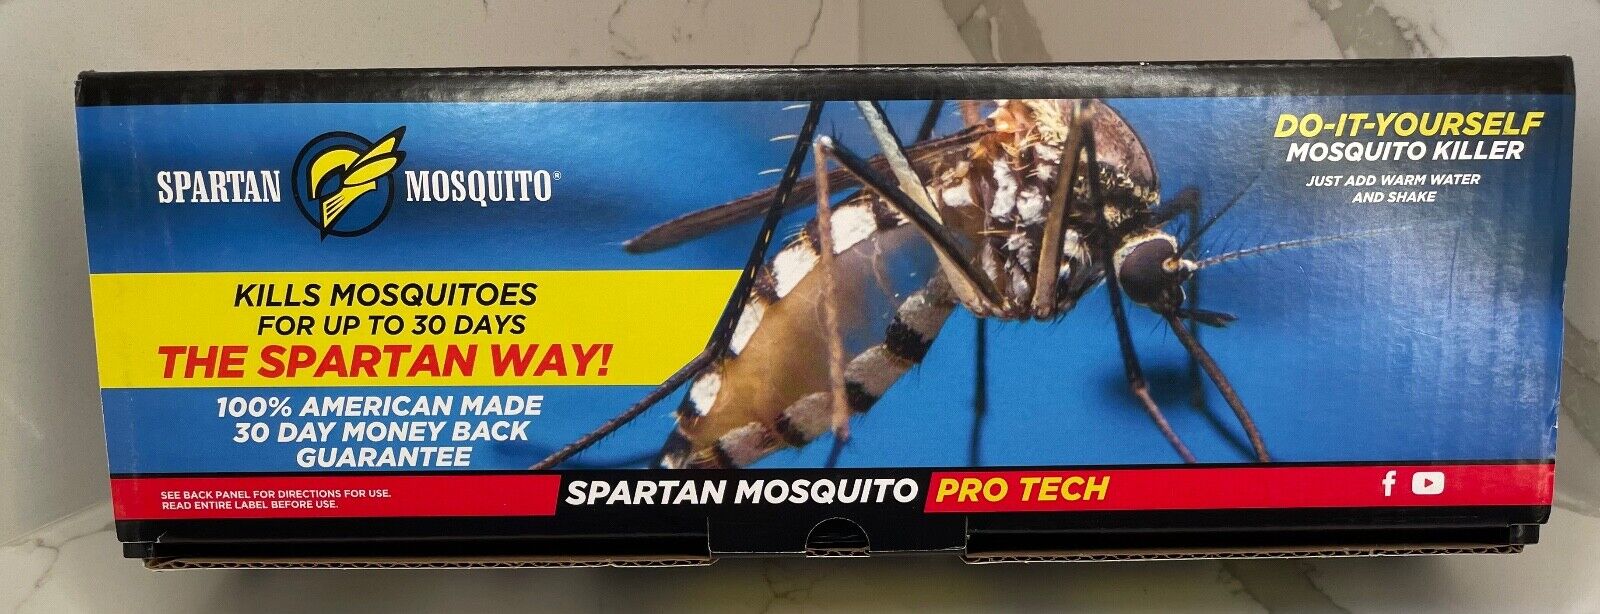 EIGHT 8 Spartan Mosquito Pro Tech Insect Repellent Device Tubes 4 BOXES Trap NEW Spartan Mosquito Spartan Mosquito Pro Tech - фотография #2